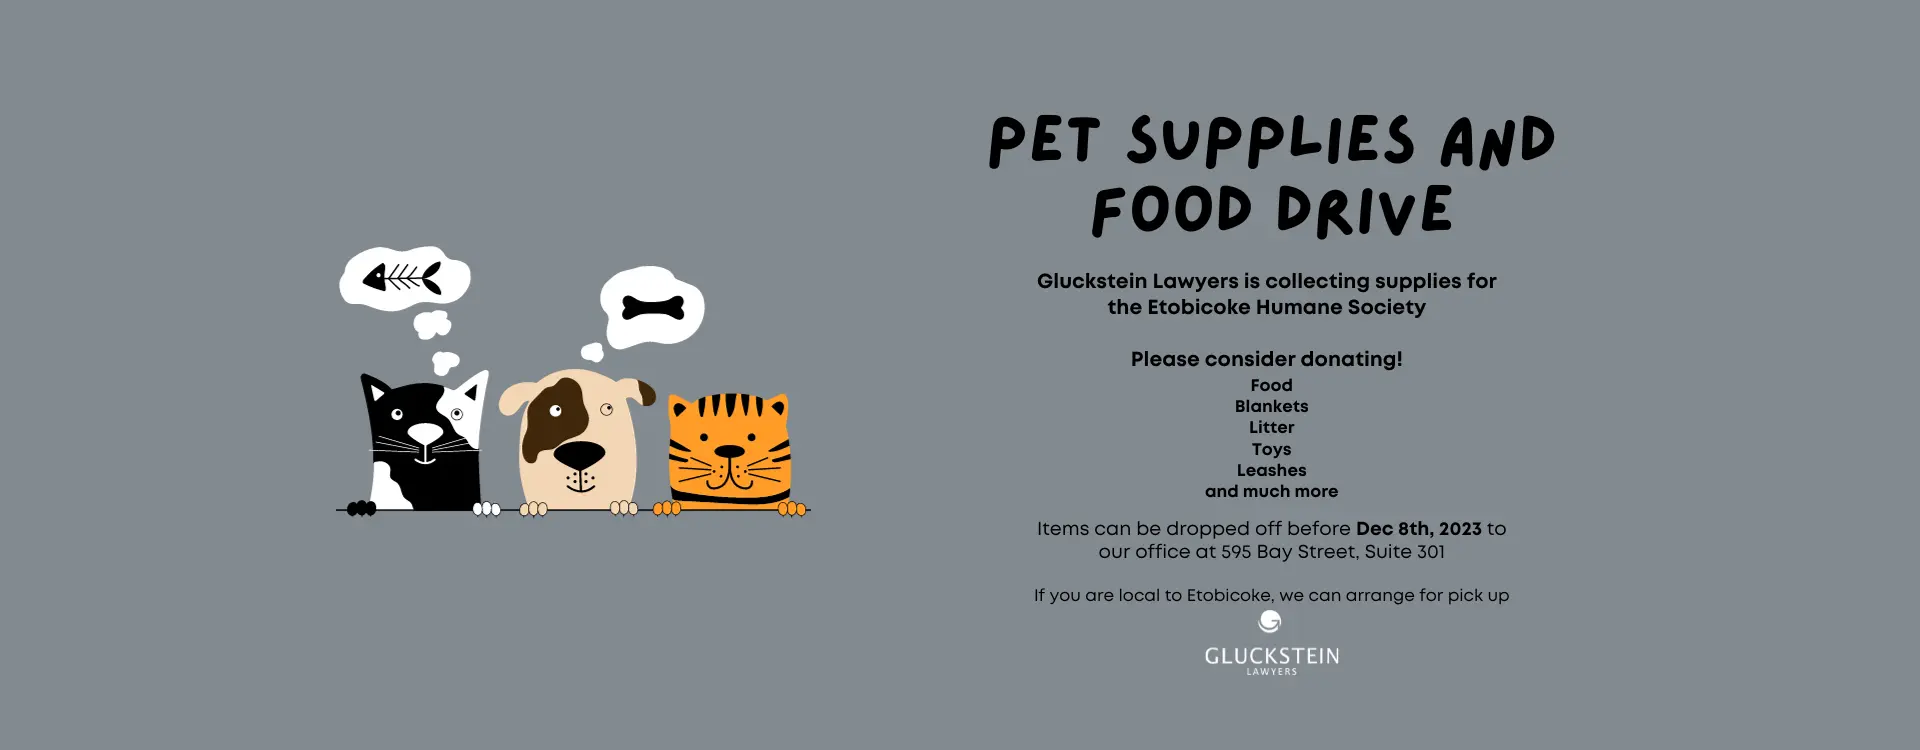 Pet Supplies and Food Drive 2023